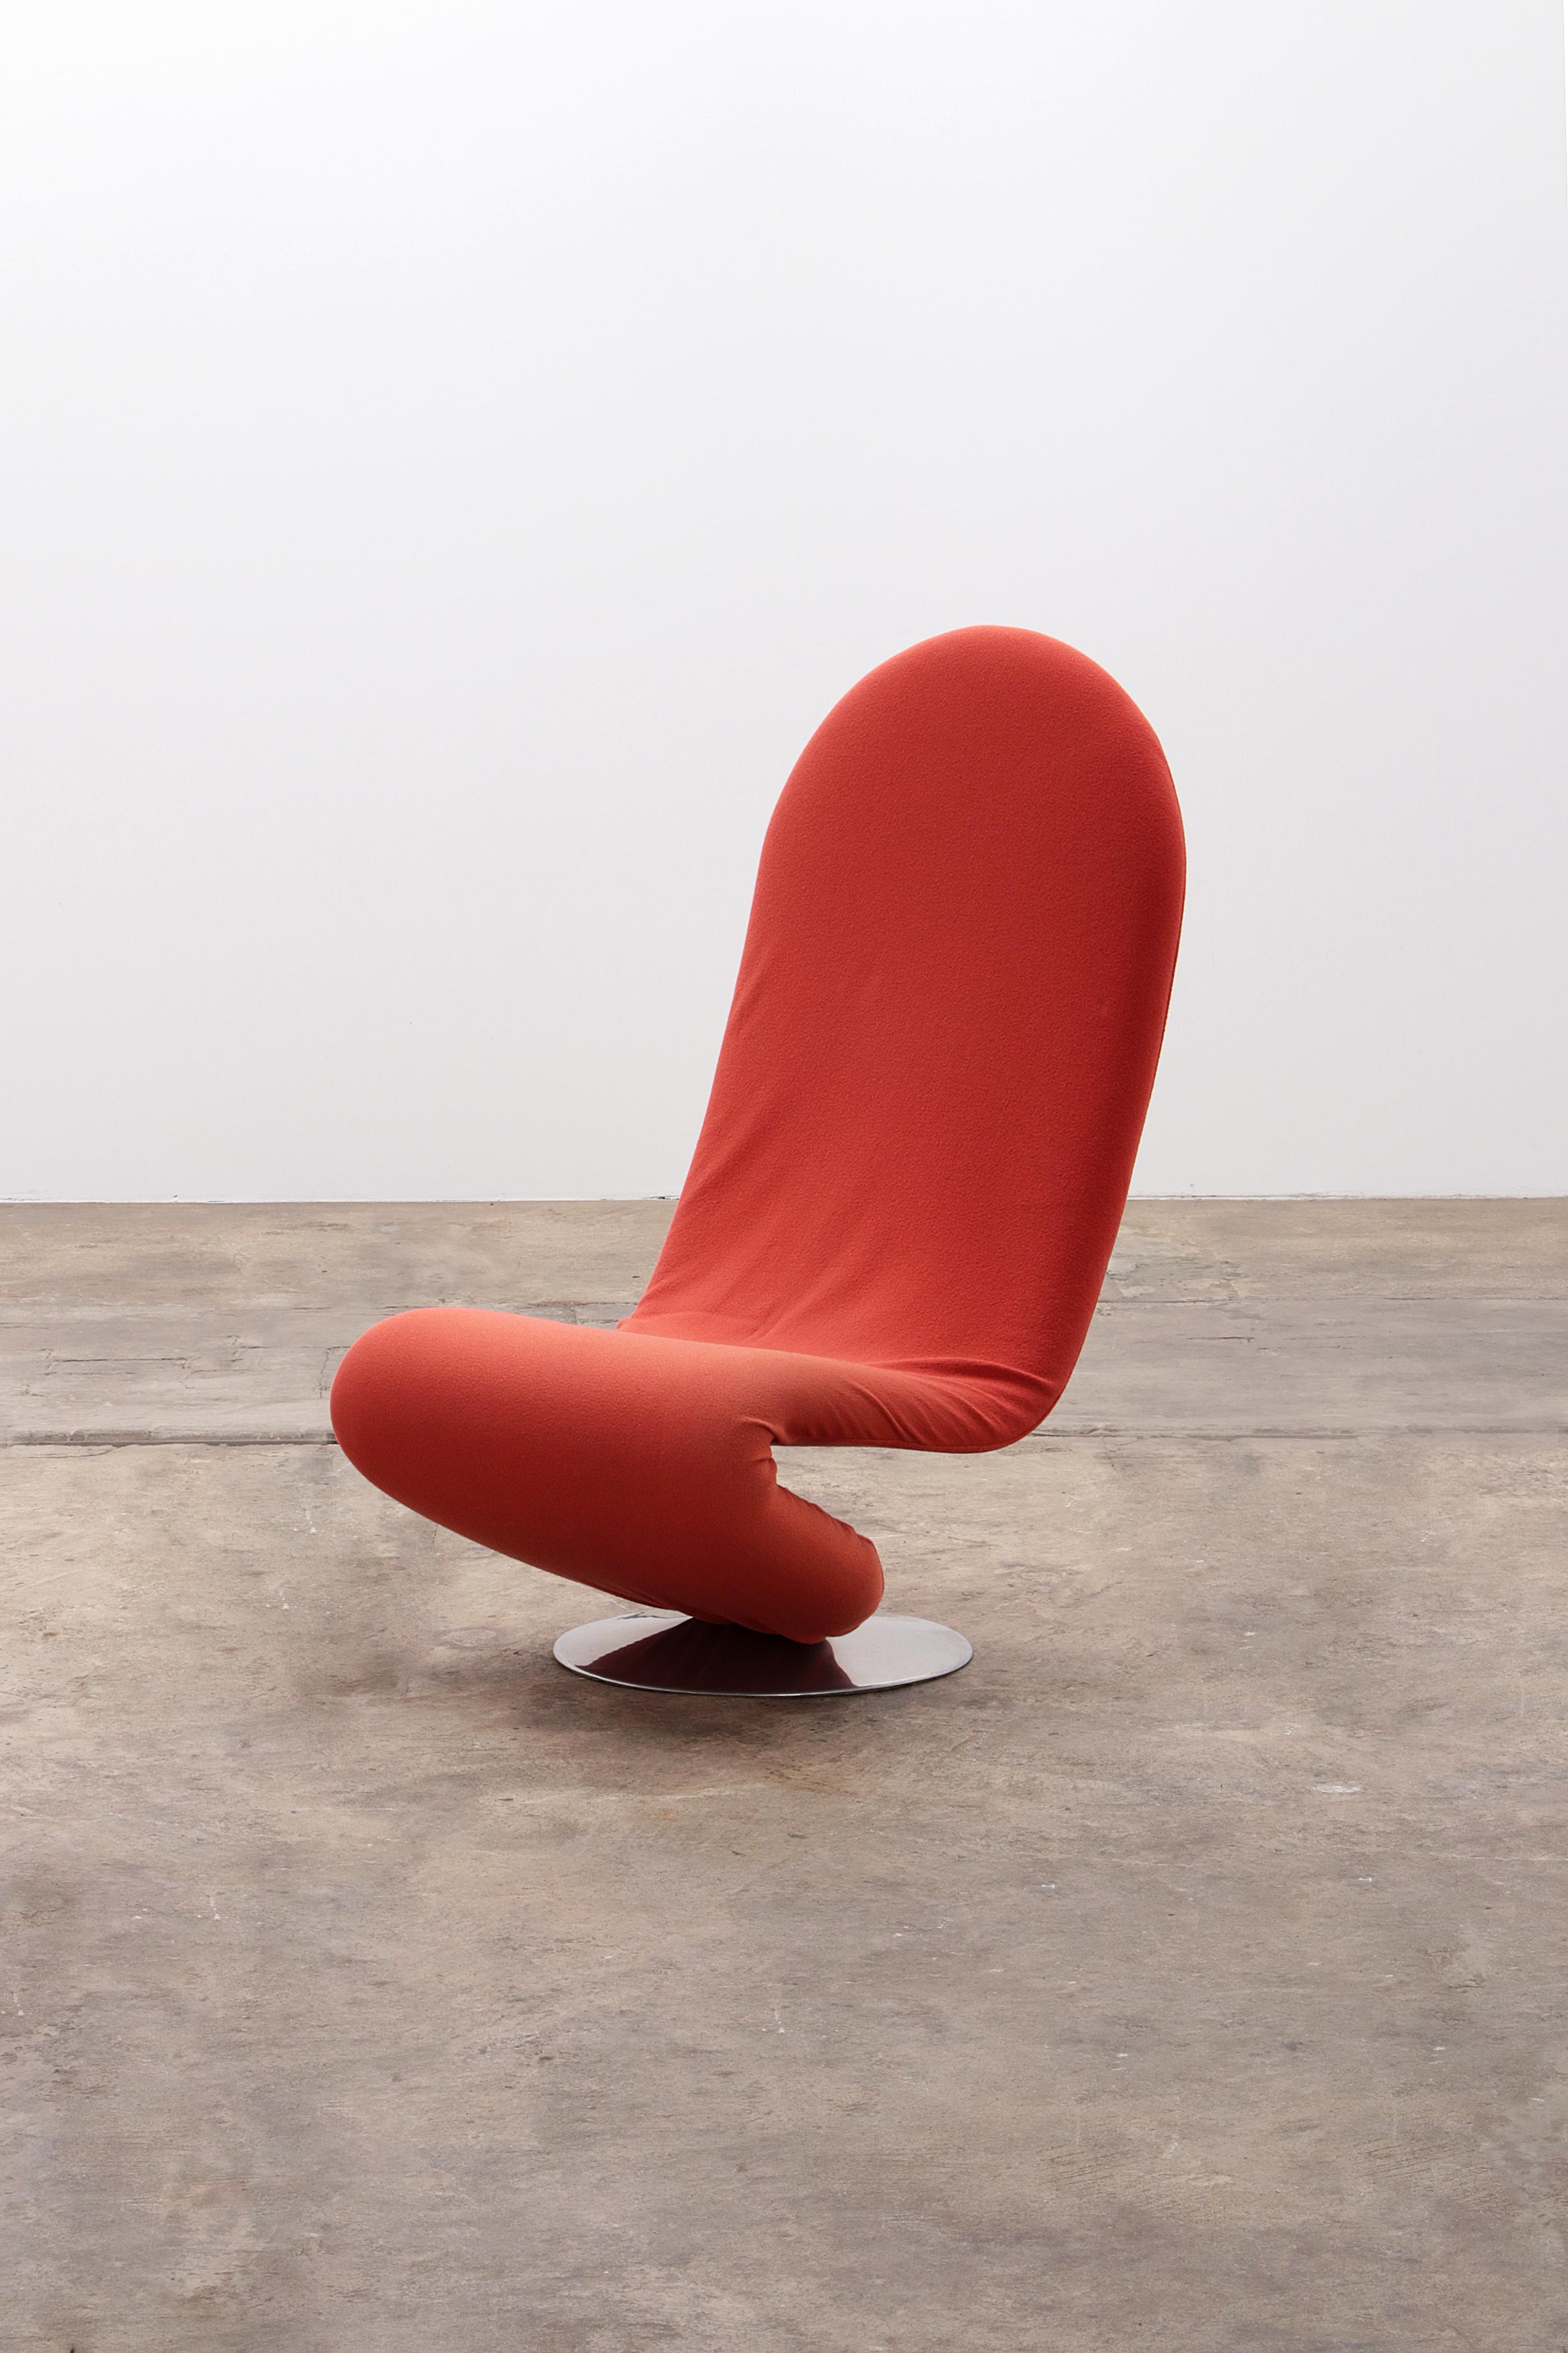 Discover the iconic Fritz Hansen 1-2-3 Chair, designed by the legendary Danish designer Verner Panton. This rare model 'System 123' from 1973, covered in a striking red/orange fabric, is a true masterpiece that transforms any room. Verner Panton,